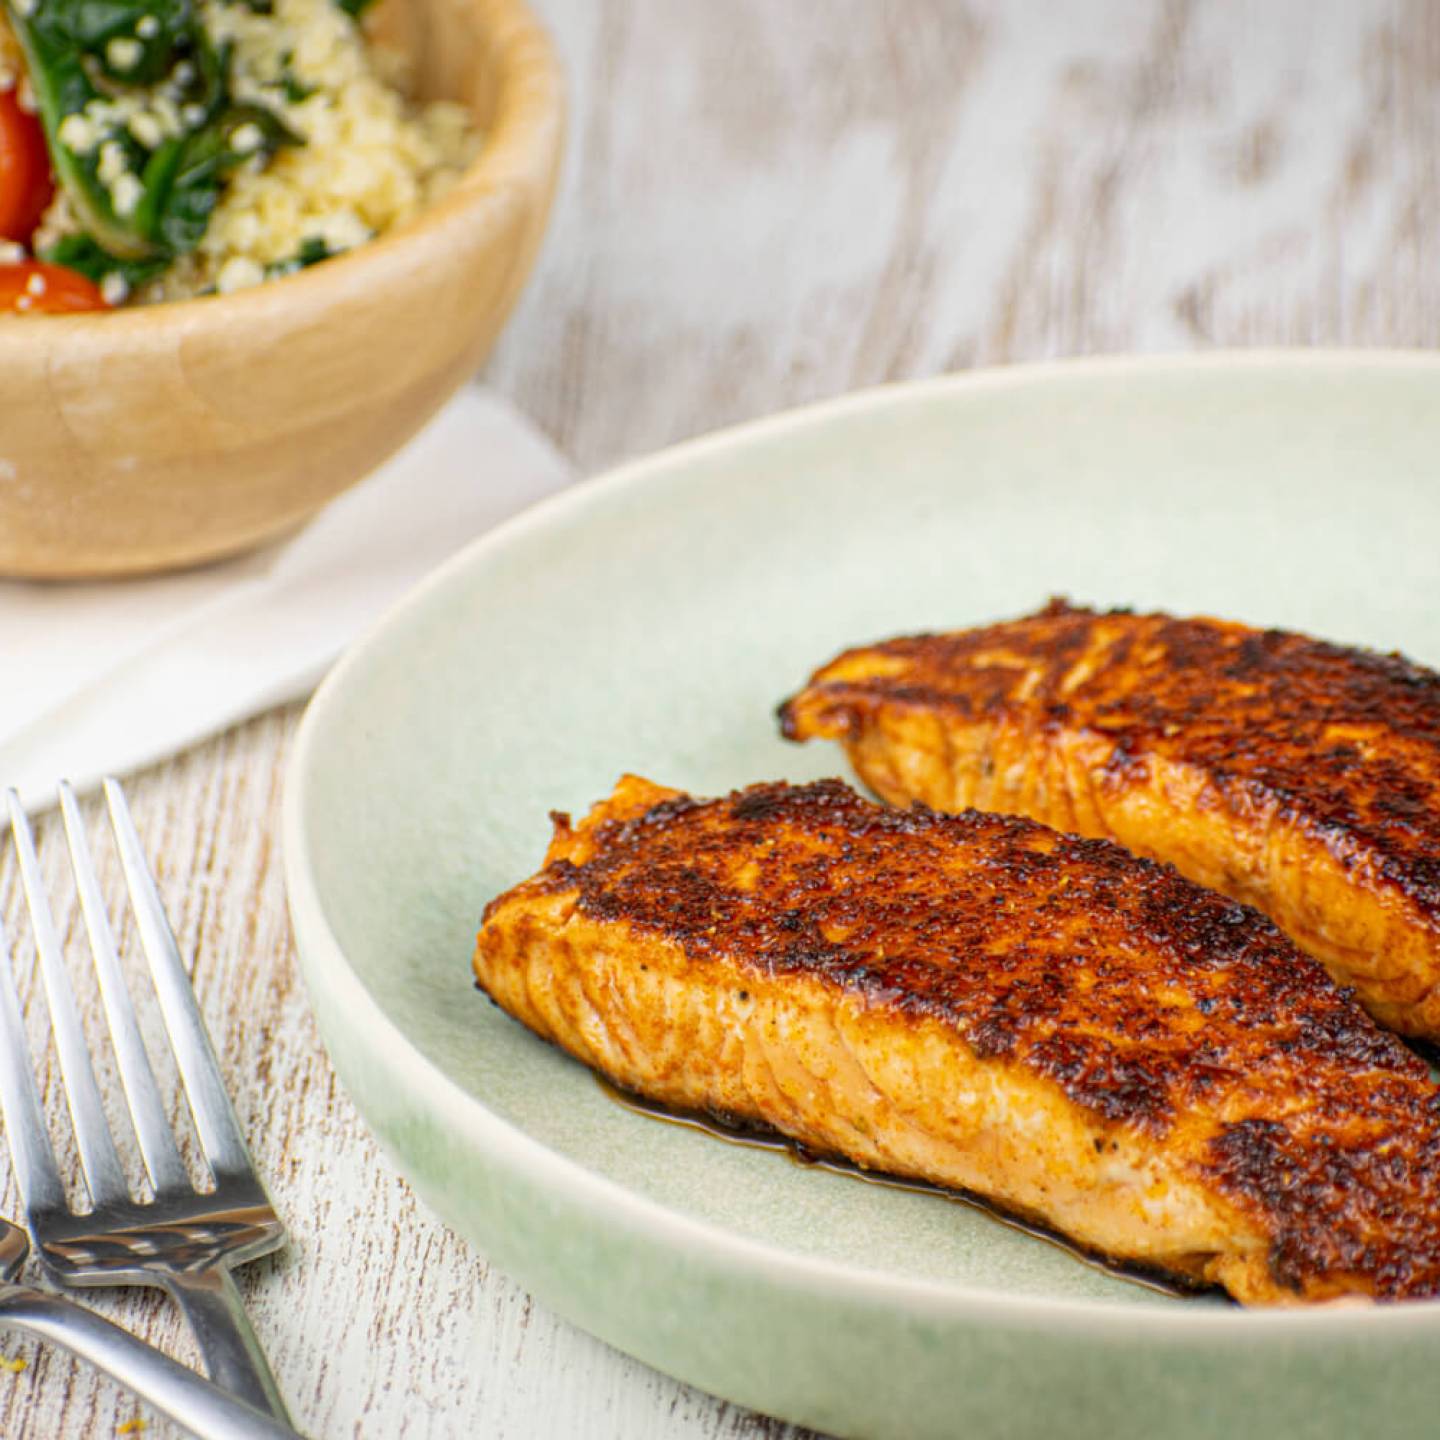 Sweet and spicy salmon with a spice crust on a plate with salad in the background.